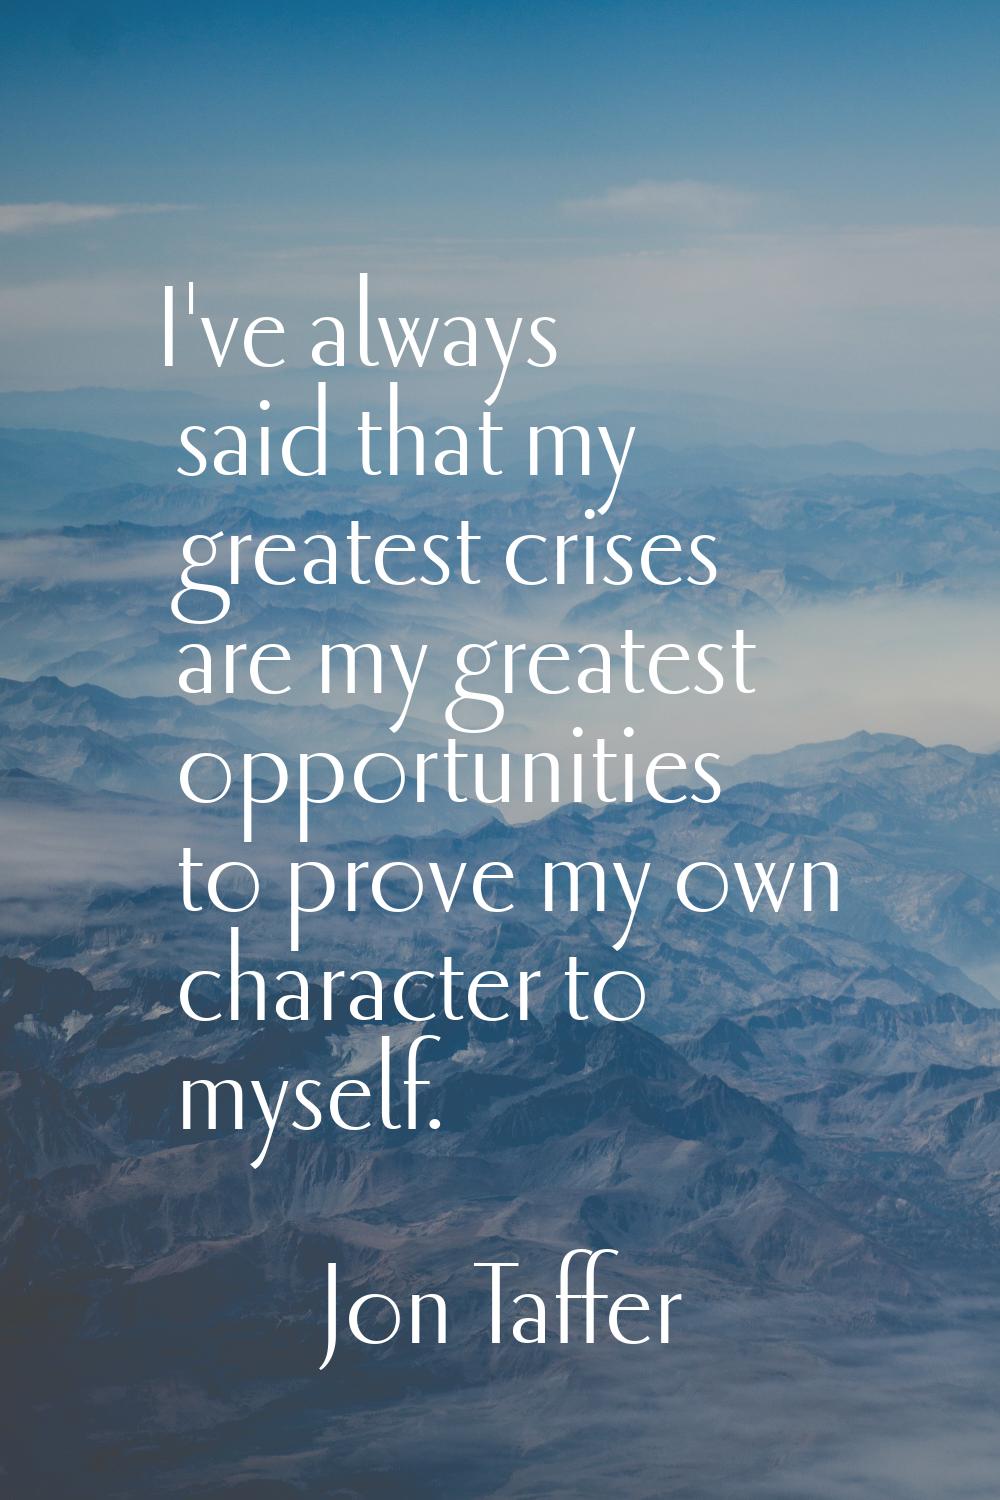 I've always said that my greatest crises are my greatest opportunities to prove my own character to